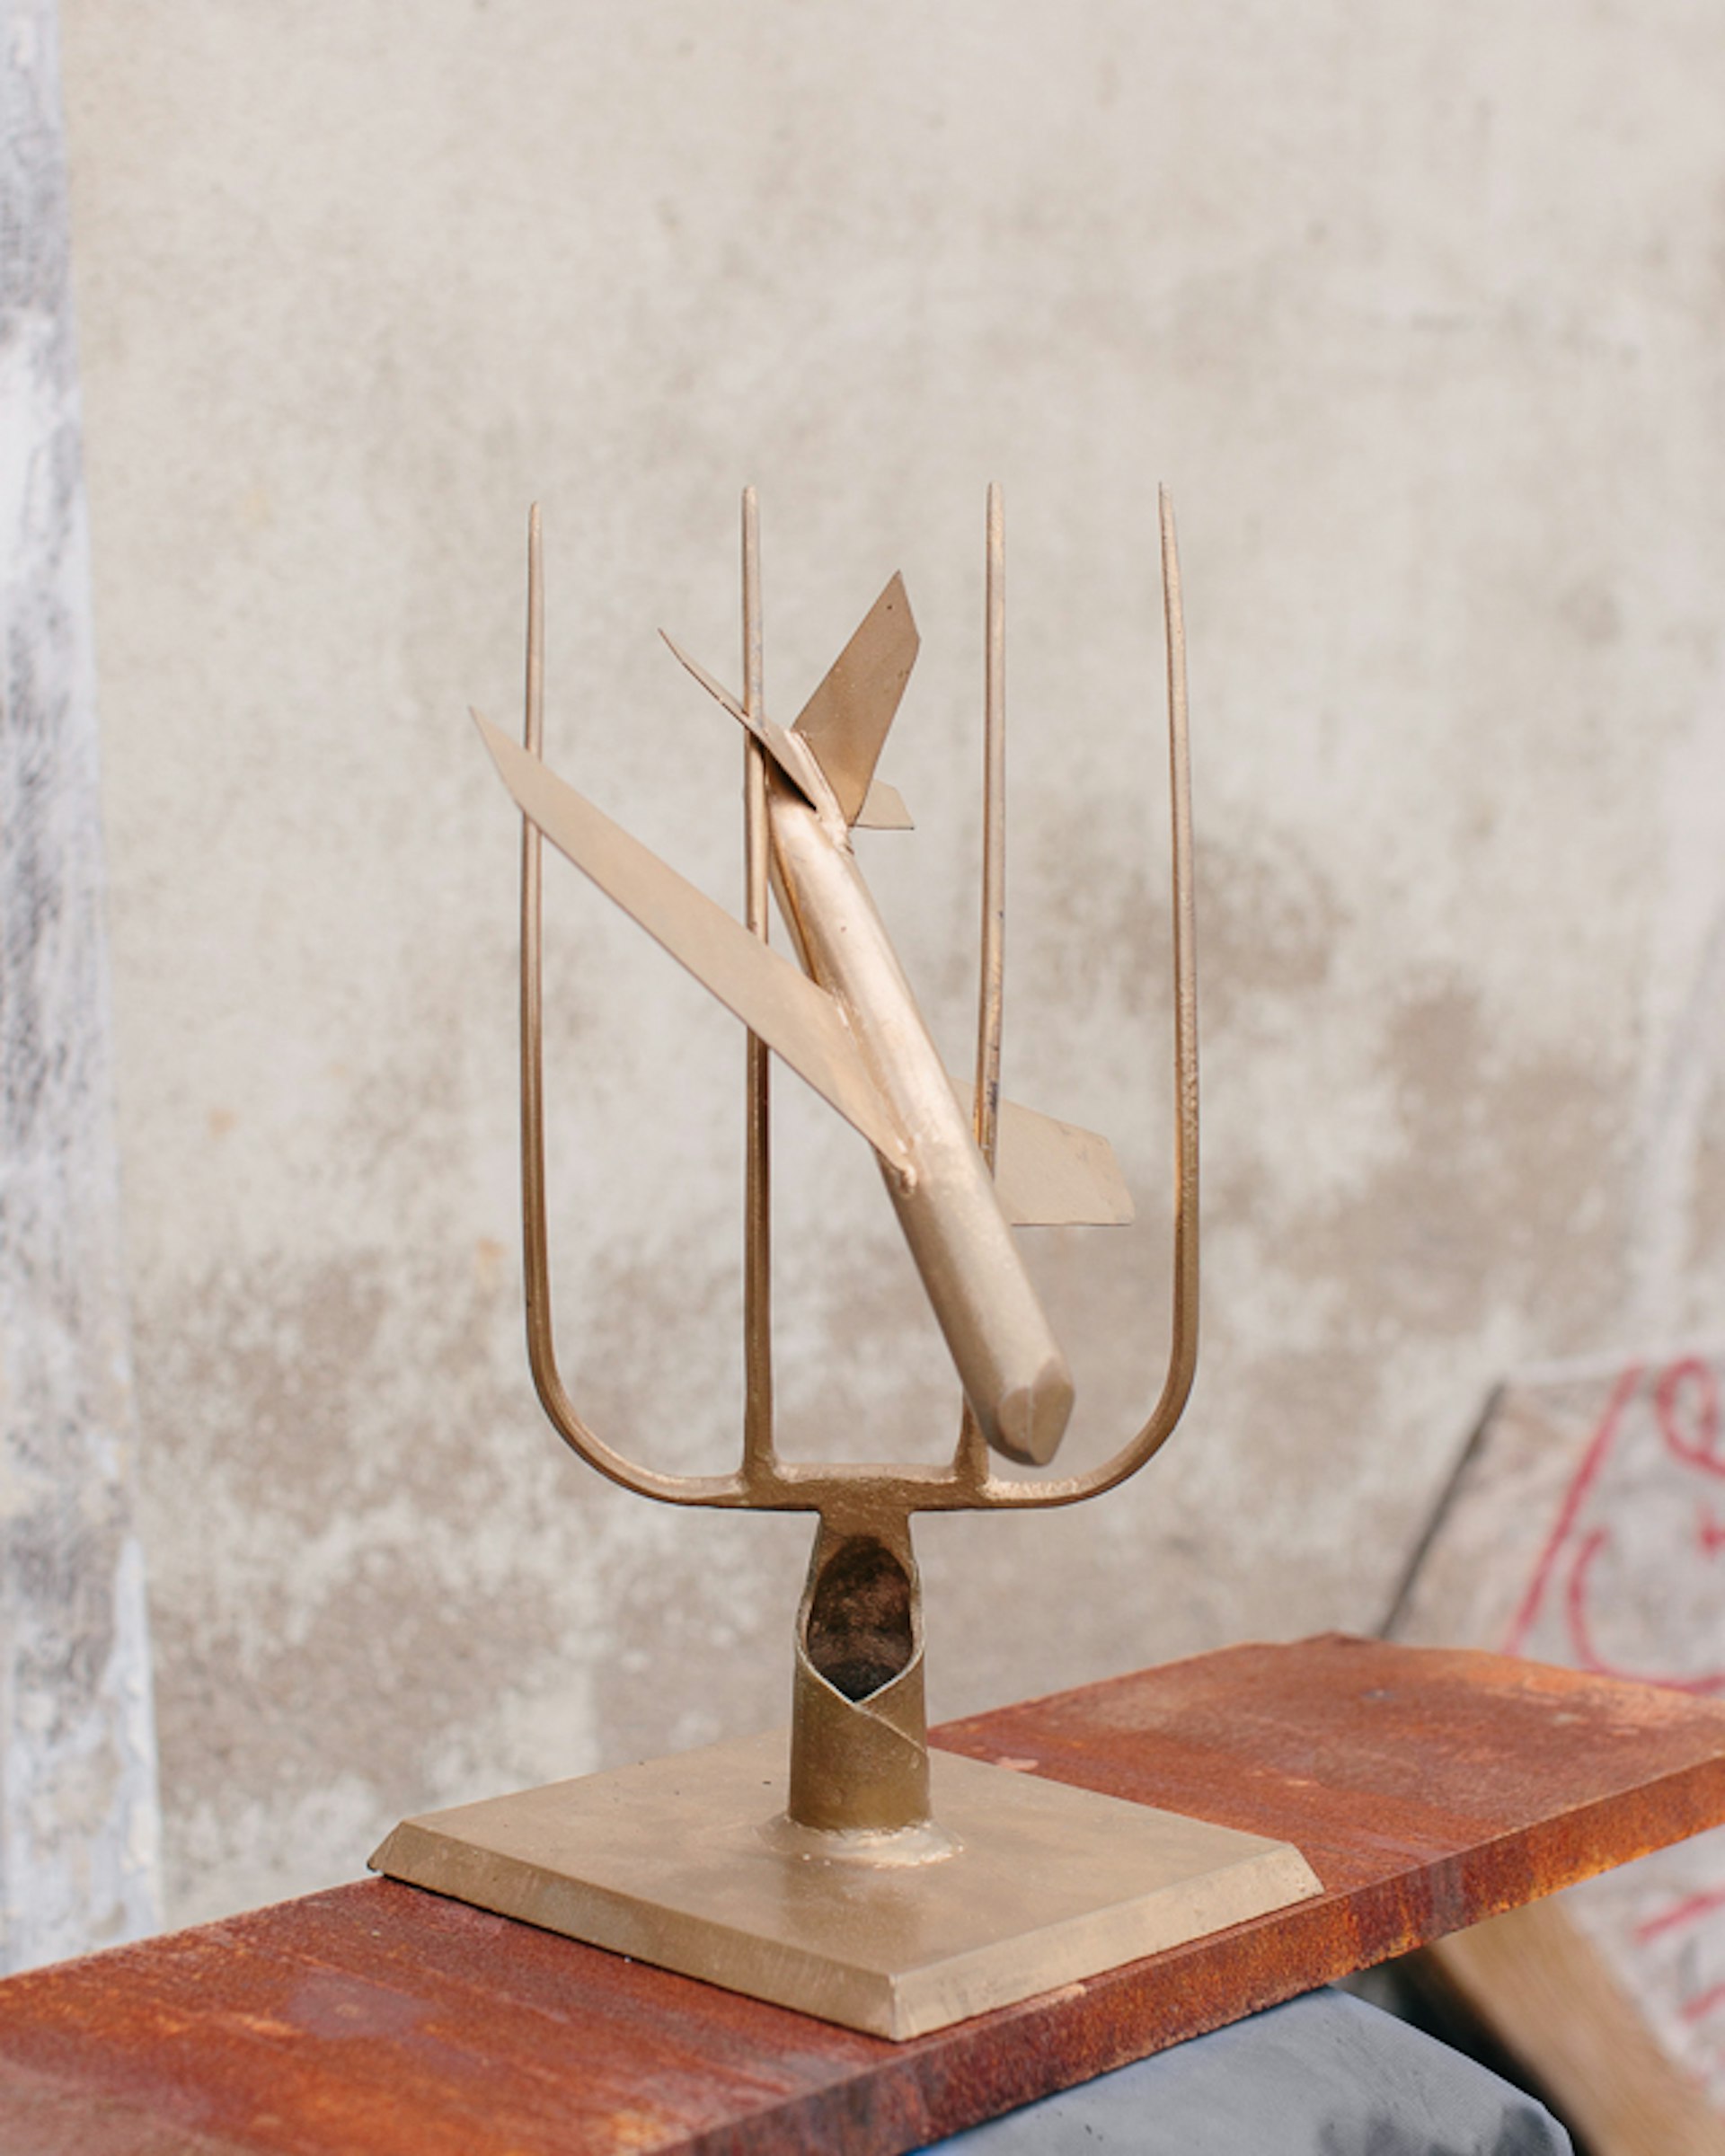 A trophy which symbolises the struggle of the farmers' fight against the airport.